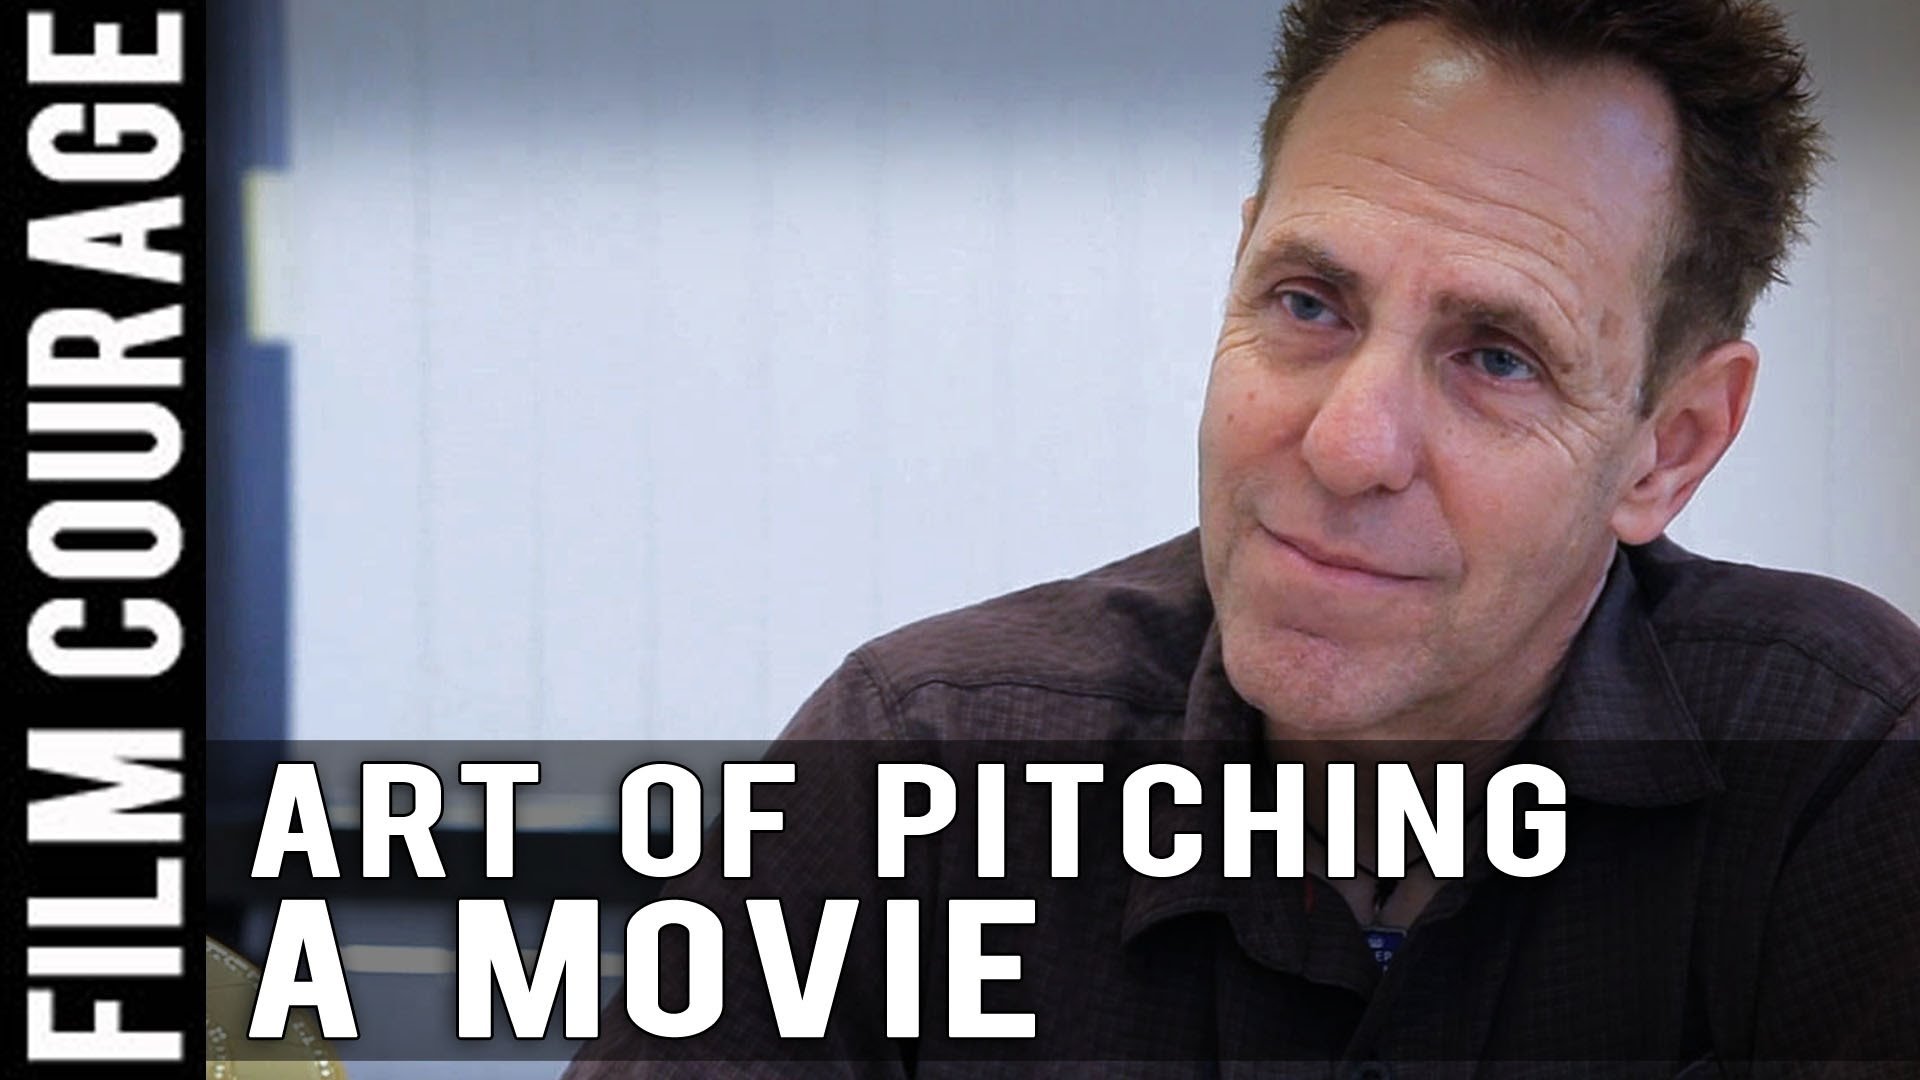 10 Amazing How To Pitch A Movie Idea the art of pitching a movie idea using the rule of 3marc scott 2022